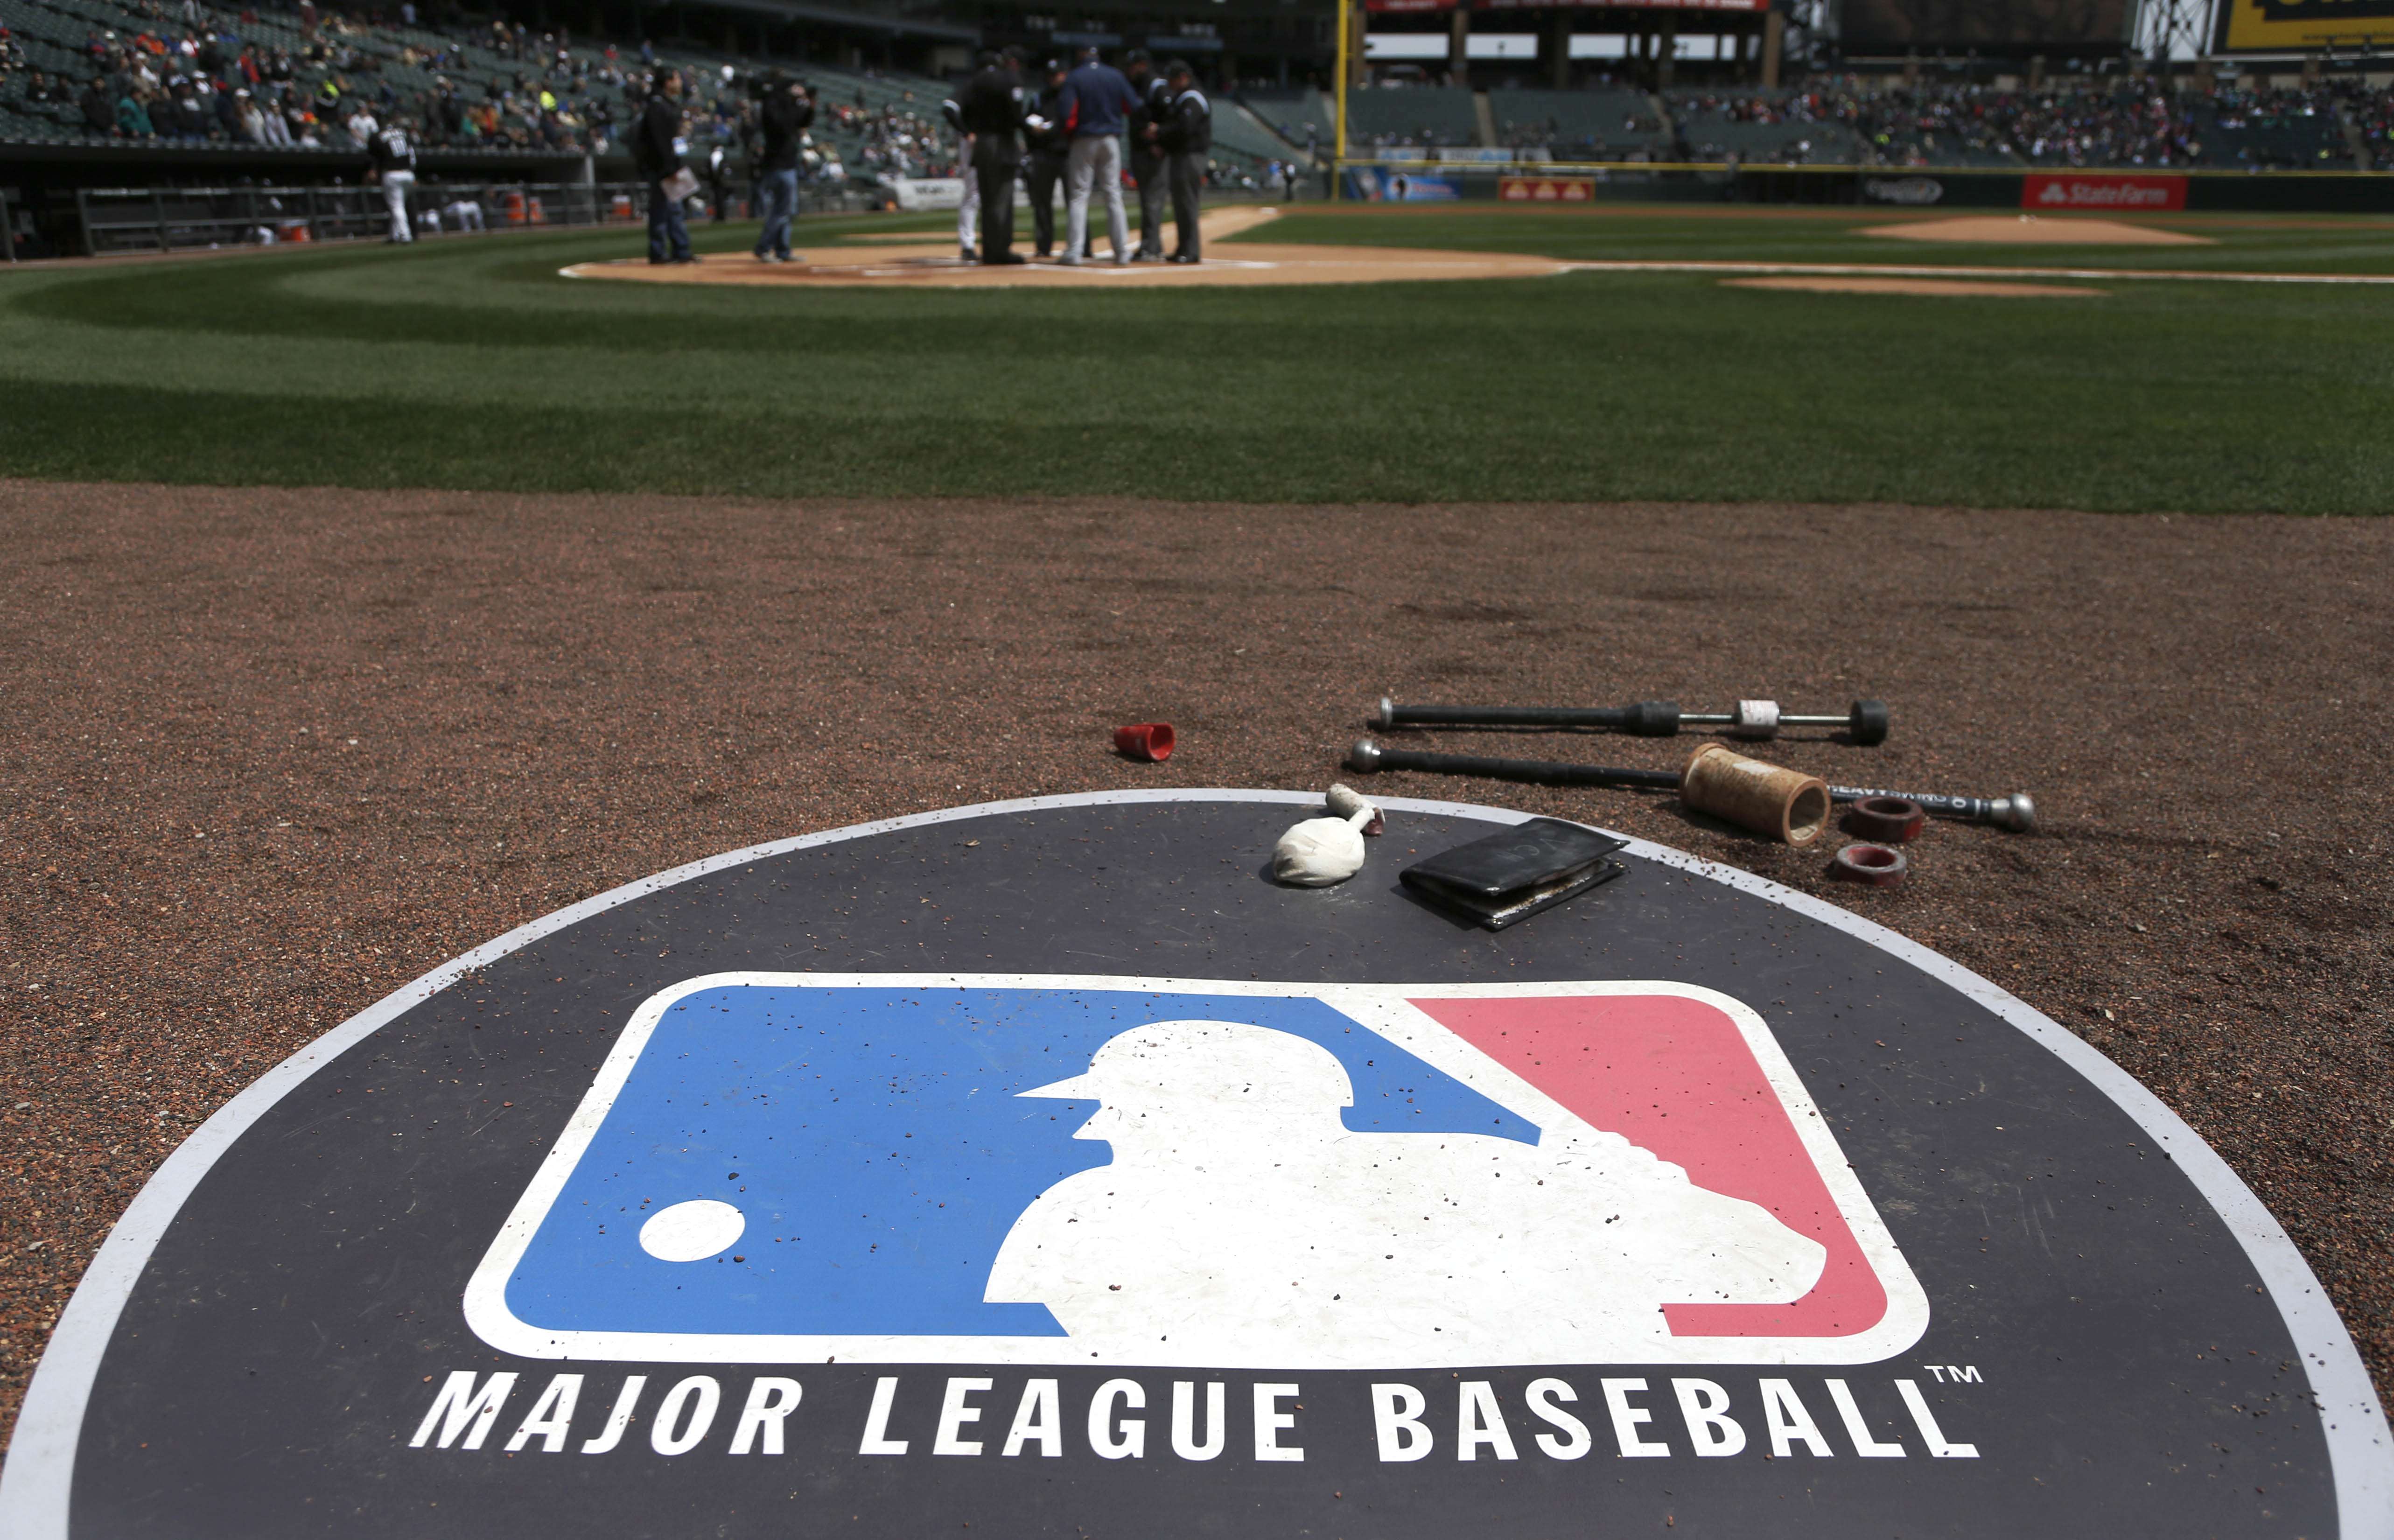 Mlb Baseball Schedule 2022 Mlb Announces Complete 2022 Schedule; Opening Day Set For March 31 |  Bleacher Report | Latest News, Videos And Highlights